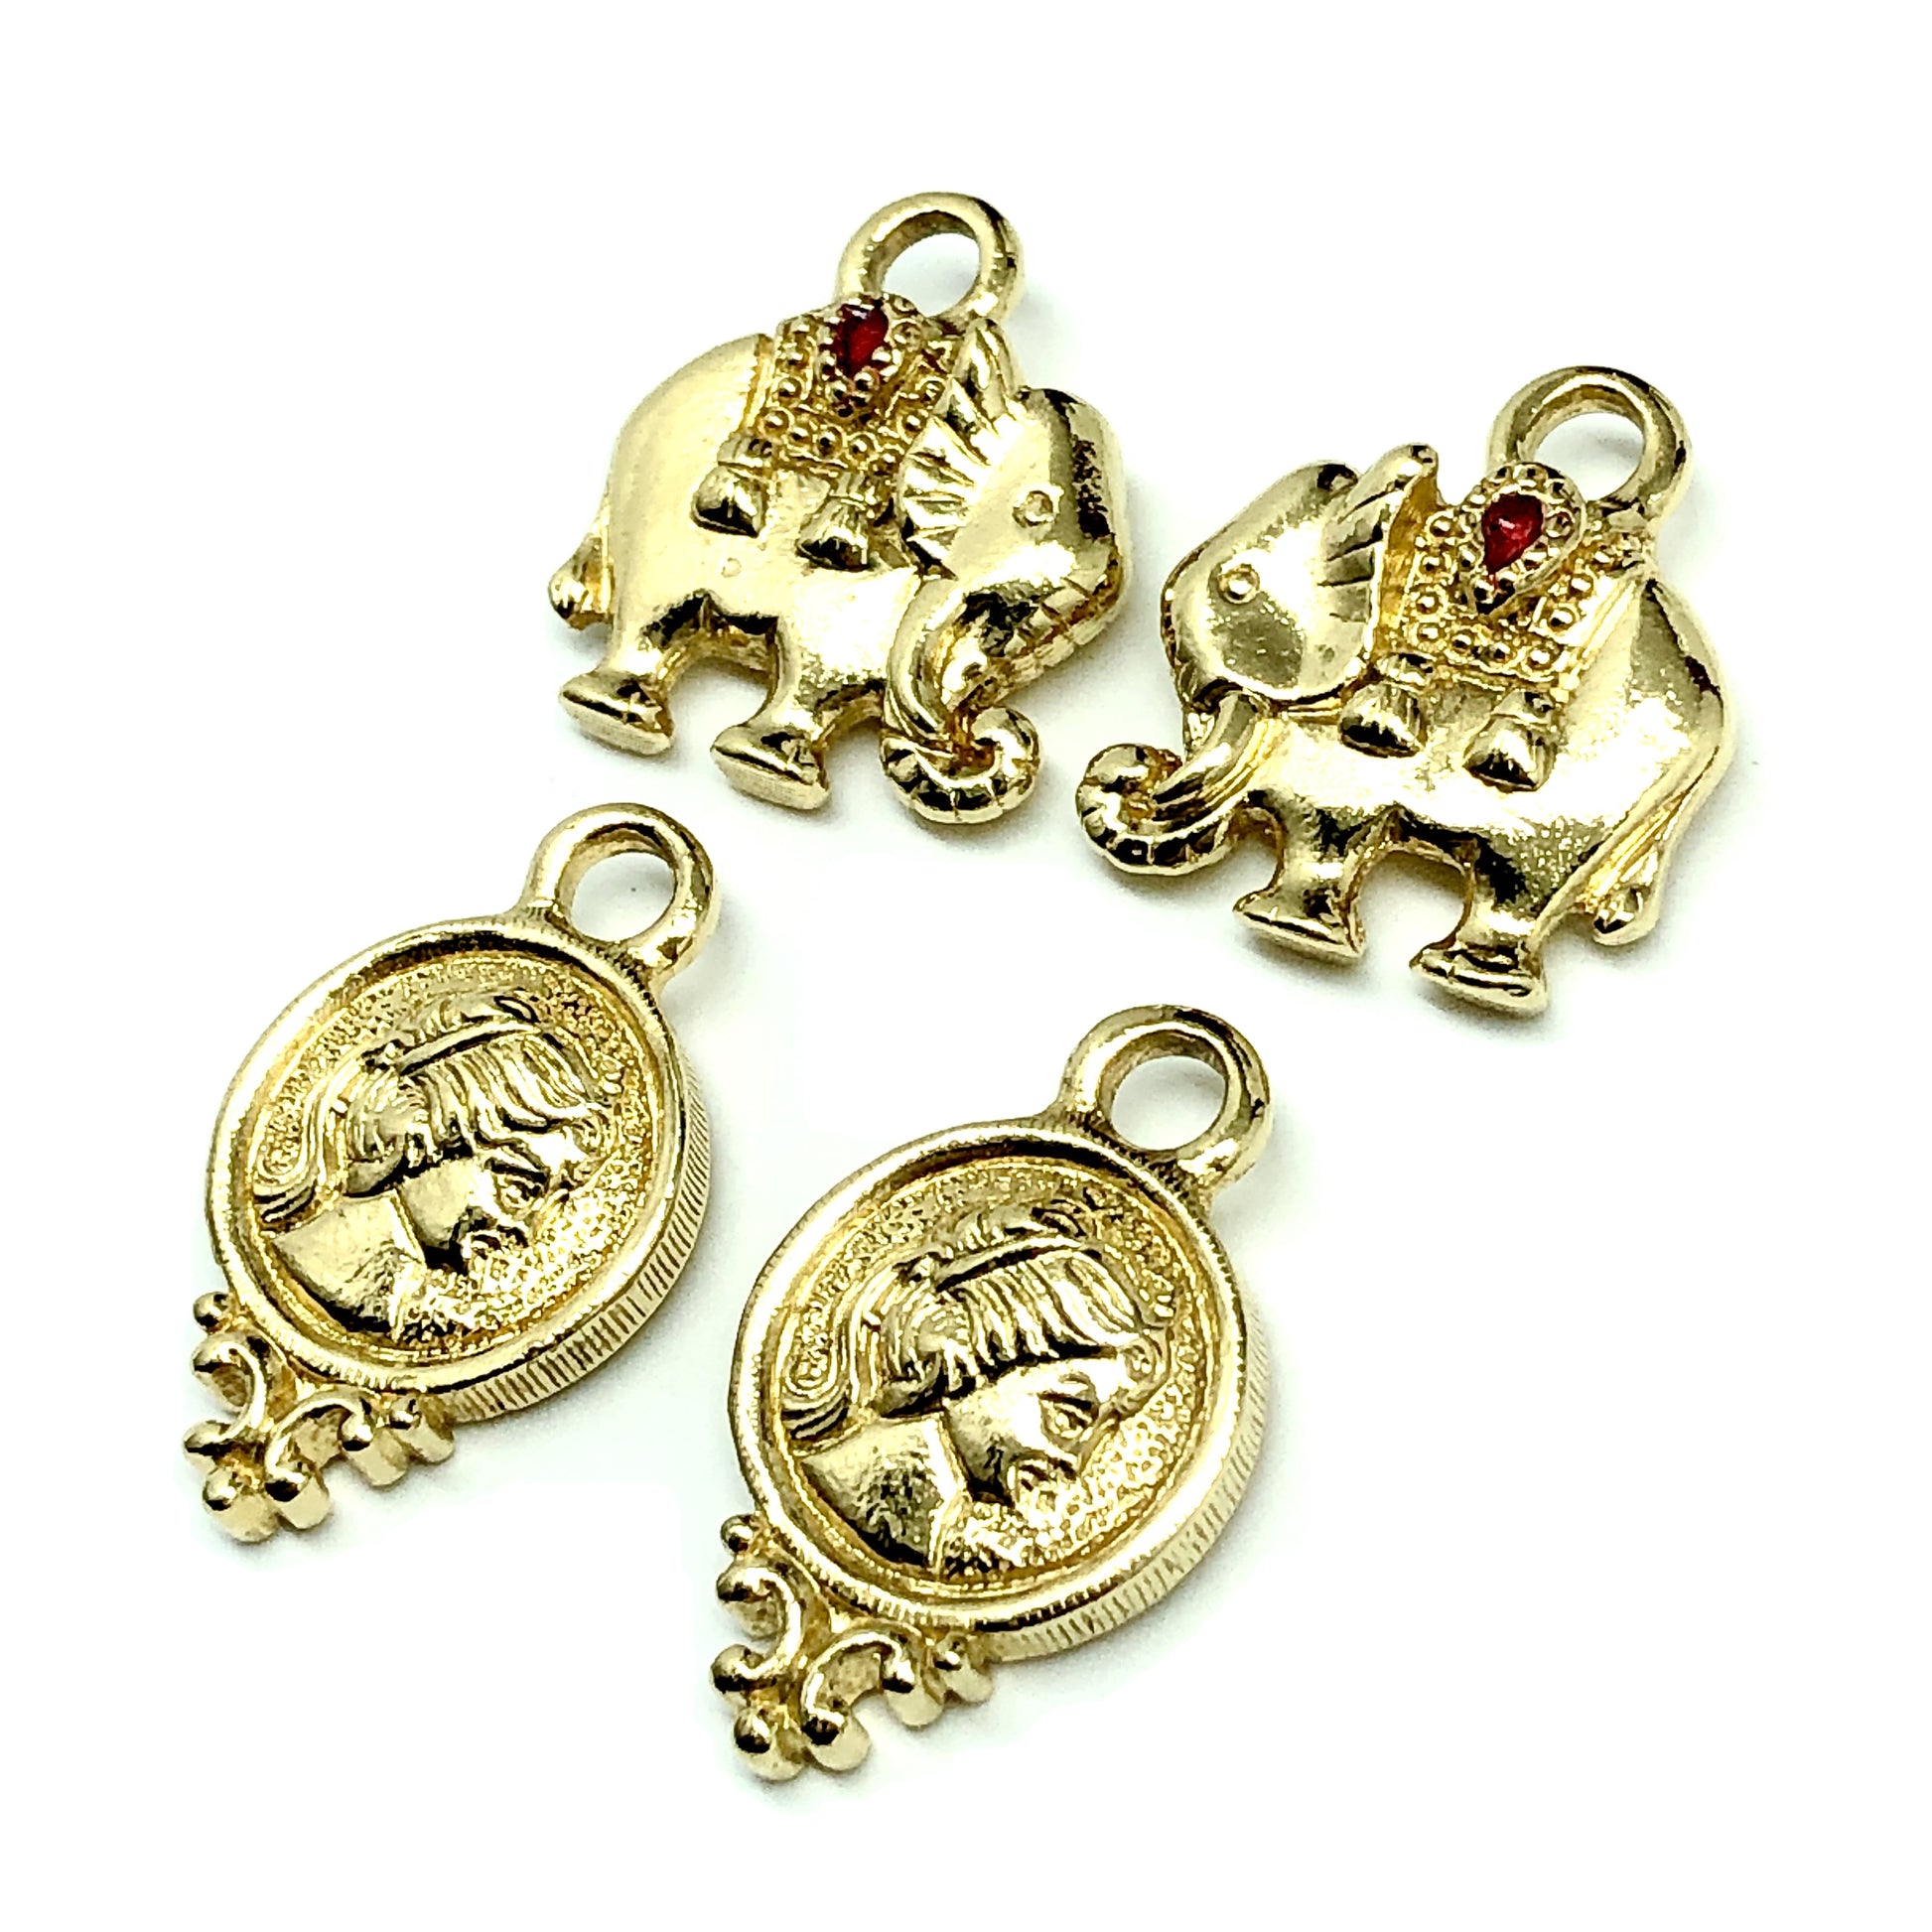 Charms & Pendants | 4 Charm Lot Gold Elephant and Woman Head Coin Charms | Jewelry Findings